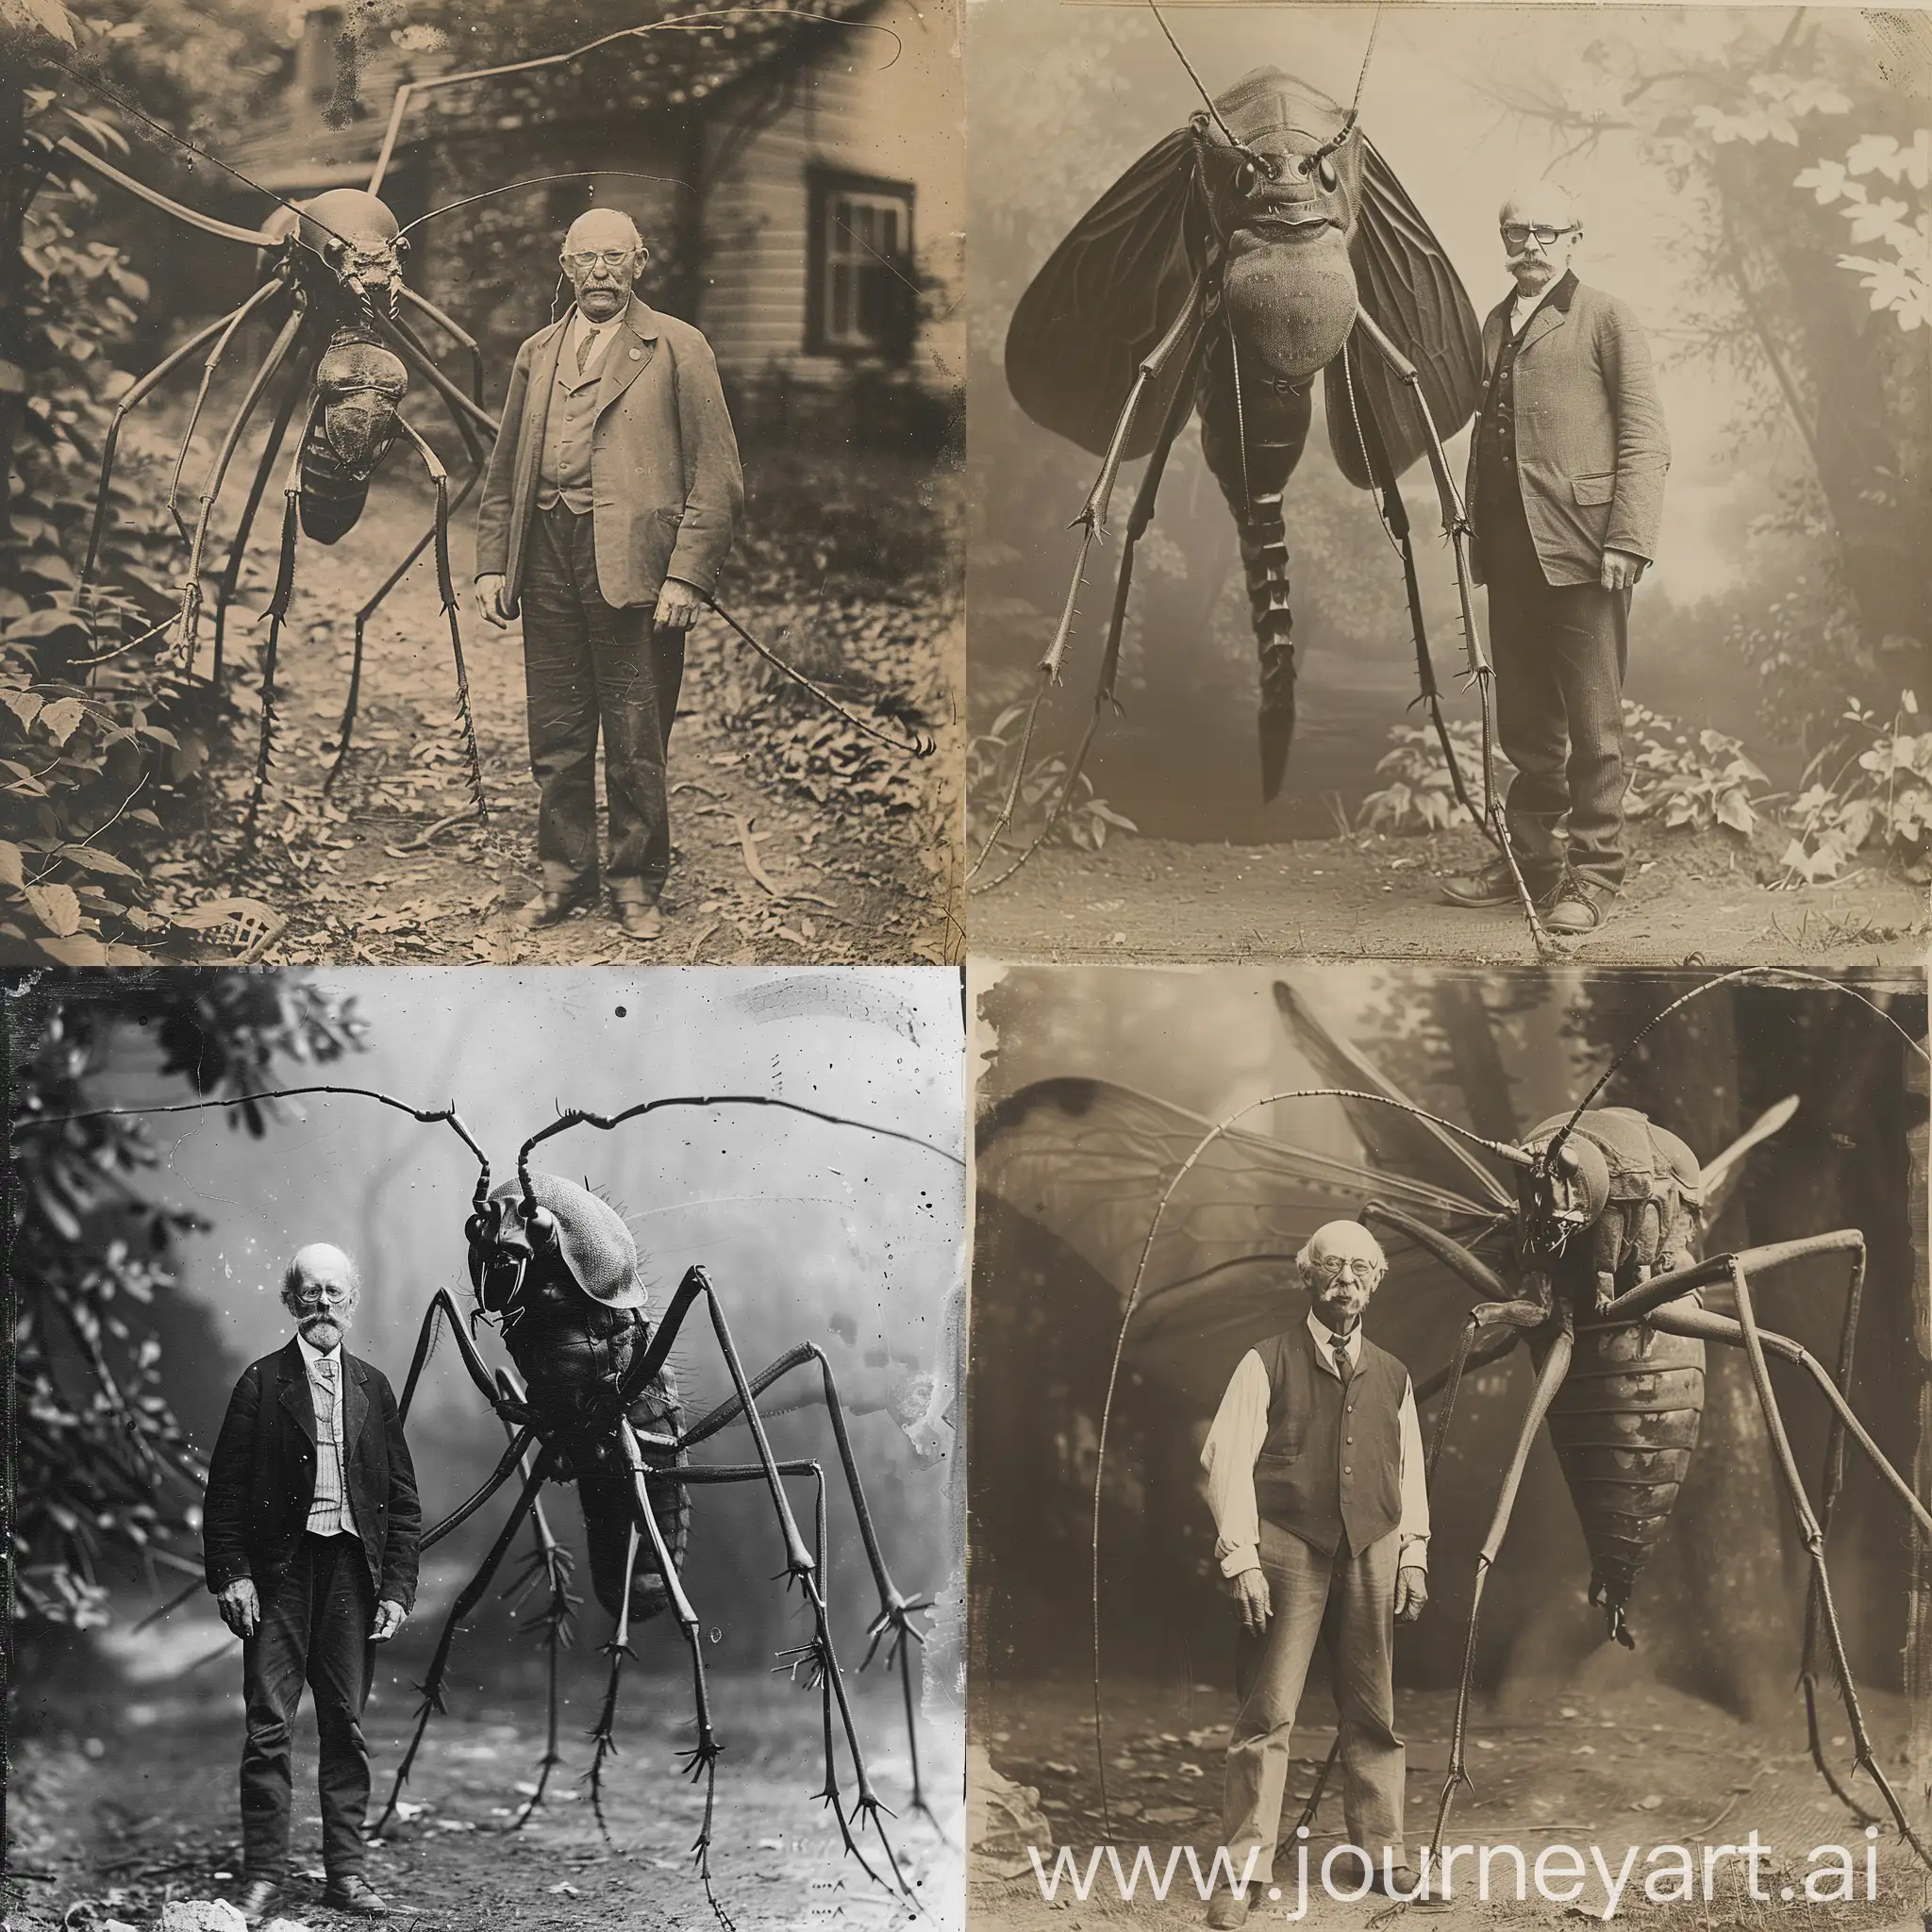 An old vintage black-and-white photo from the 19th century, in which an elderly bald scientist in vintage 19th-century clothes with a mustache and glasses stands far from the camera. Next to him stands a giant insect-like creepy alien creature.